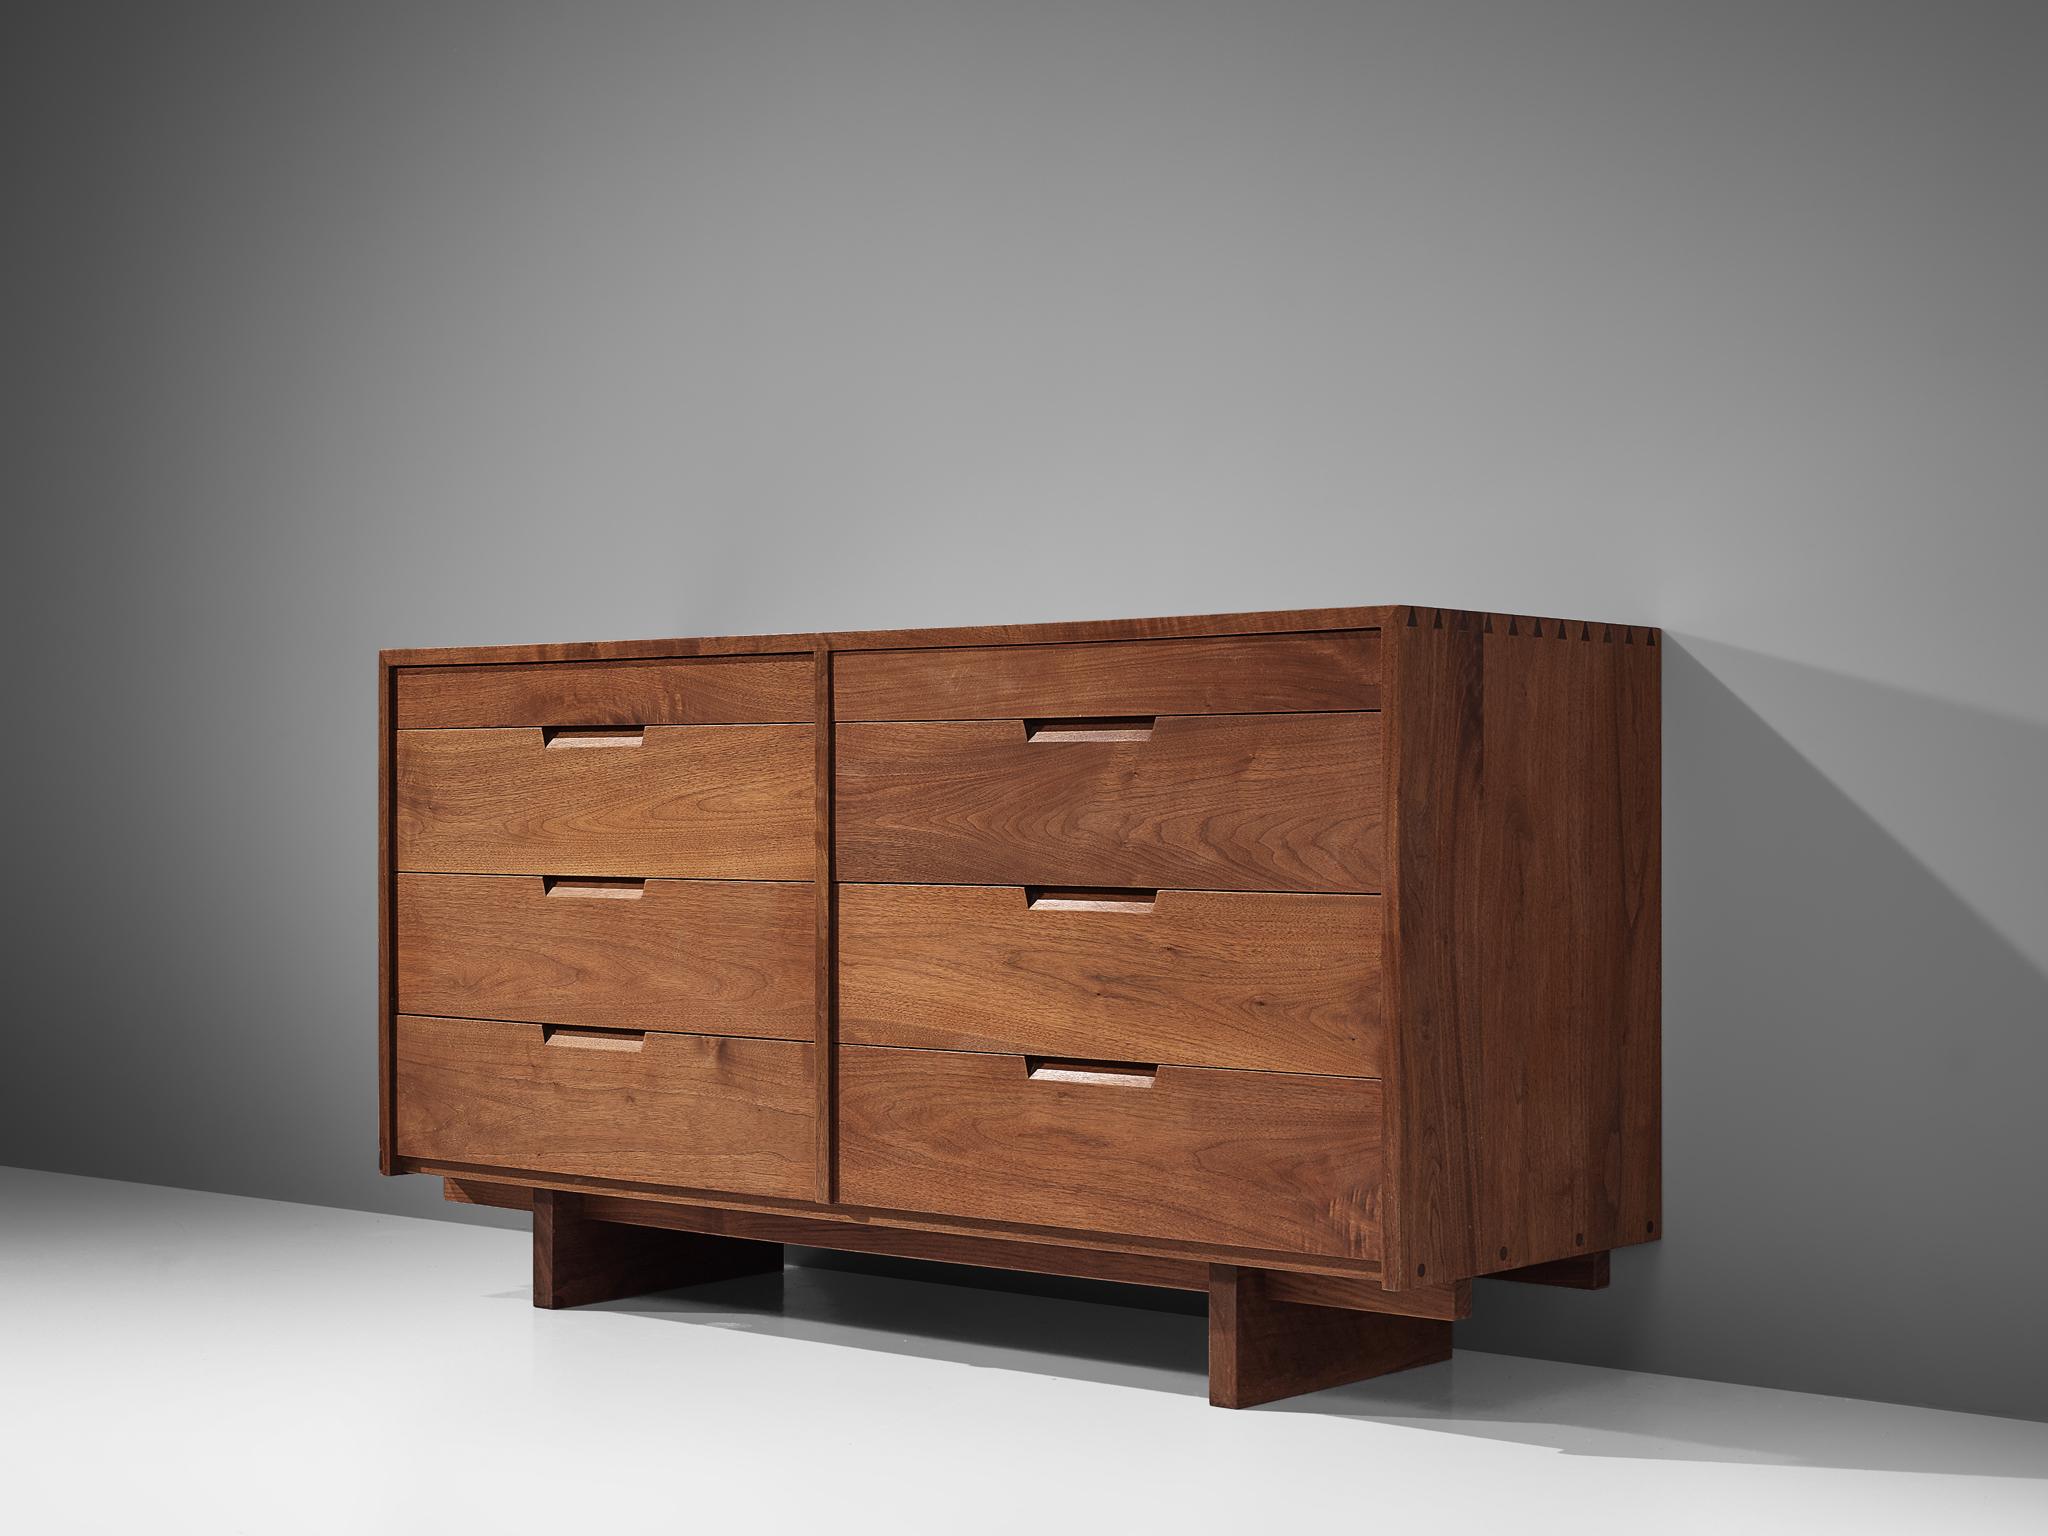 George Nakashima, cabinet in walnut, New Hope, PA, 1963.

This sideboard features eight drawers, executed in walnut with traditional and finished with archetypical dovetail Nakashima wood-joints. The cabinet rests on two slabs of solid walnut that